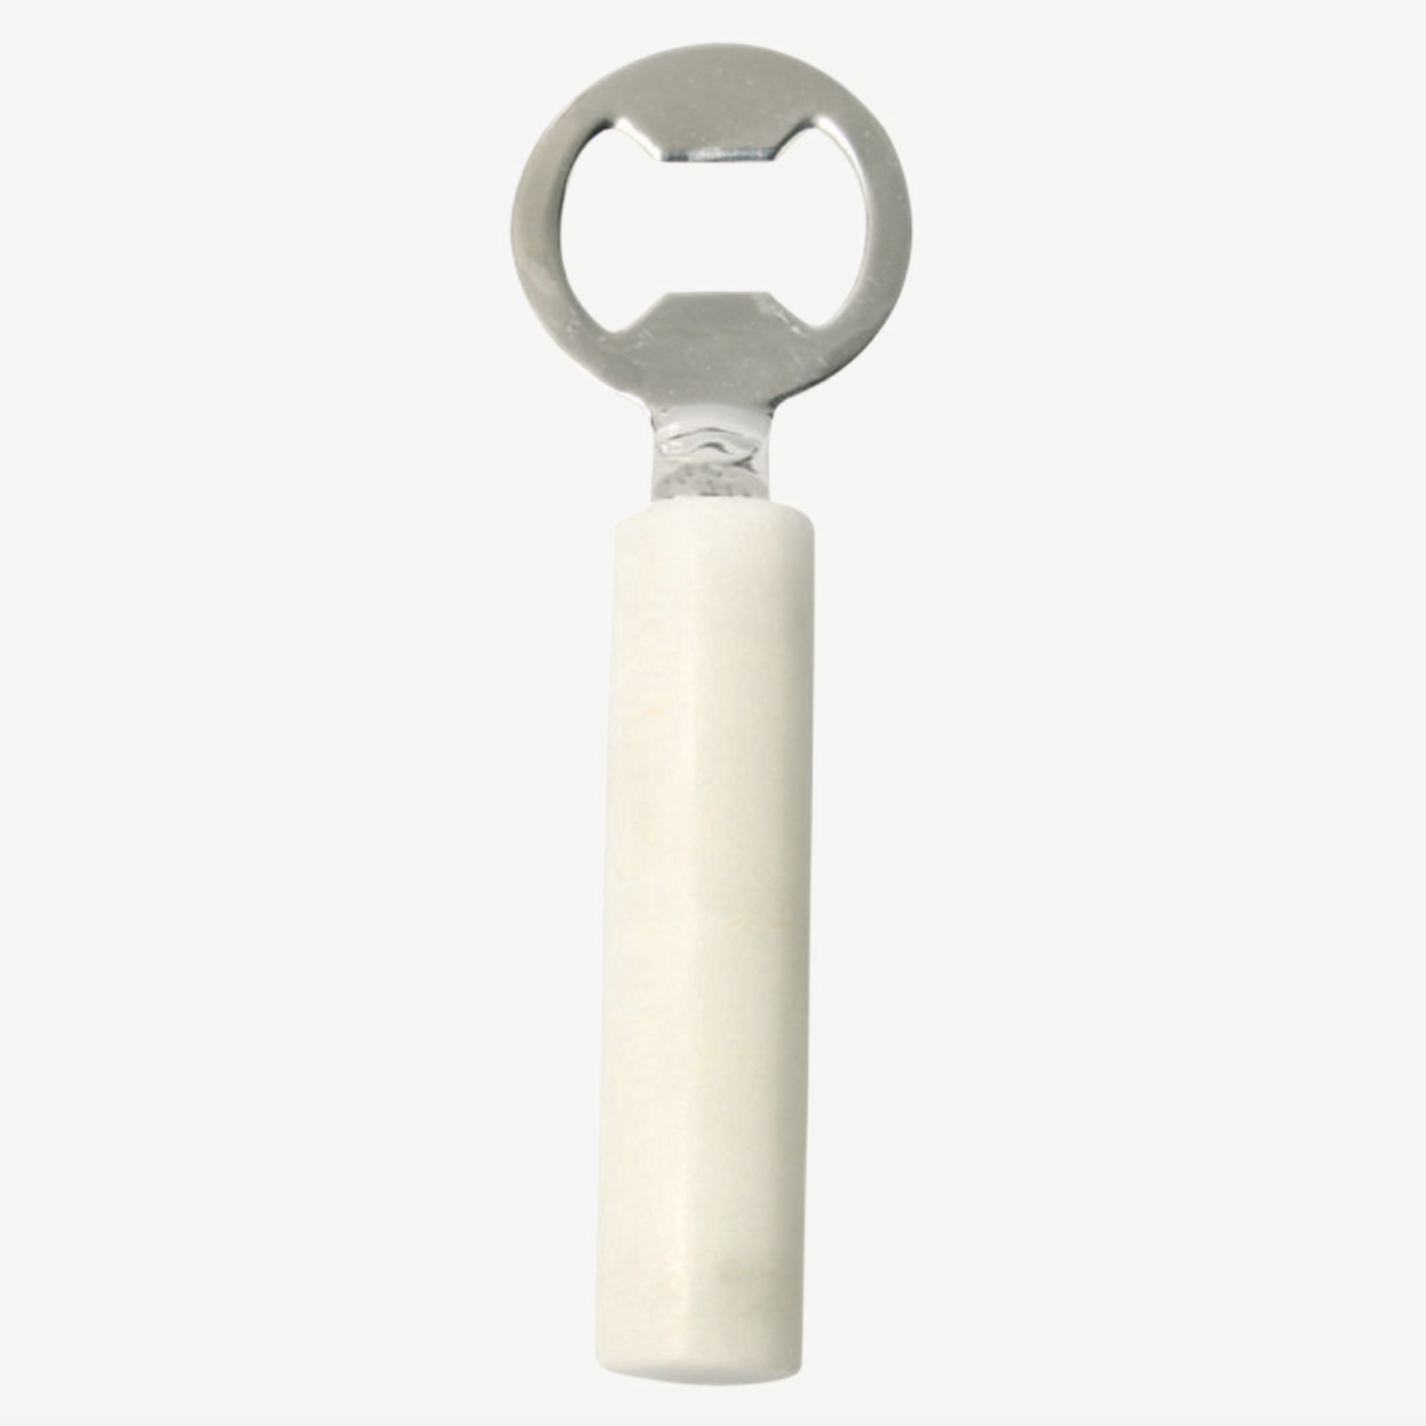 Marble and Stainless Steel Bottle Opener